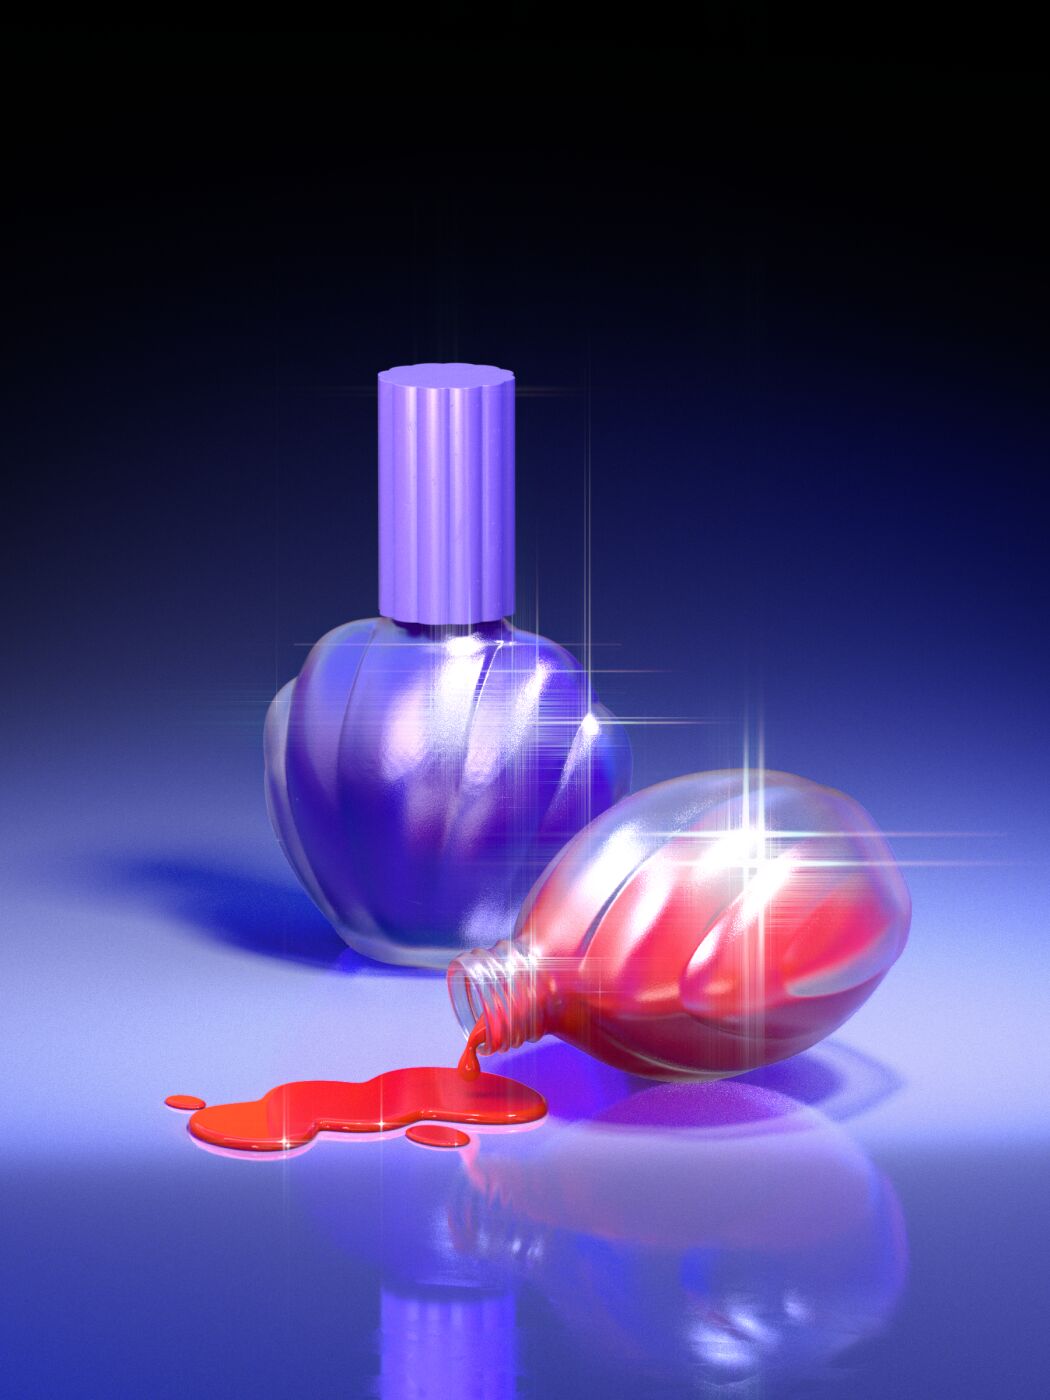 3D stills by Double up Studio, visual art for a beauty brand.